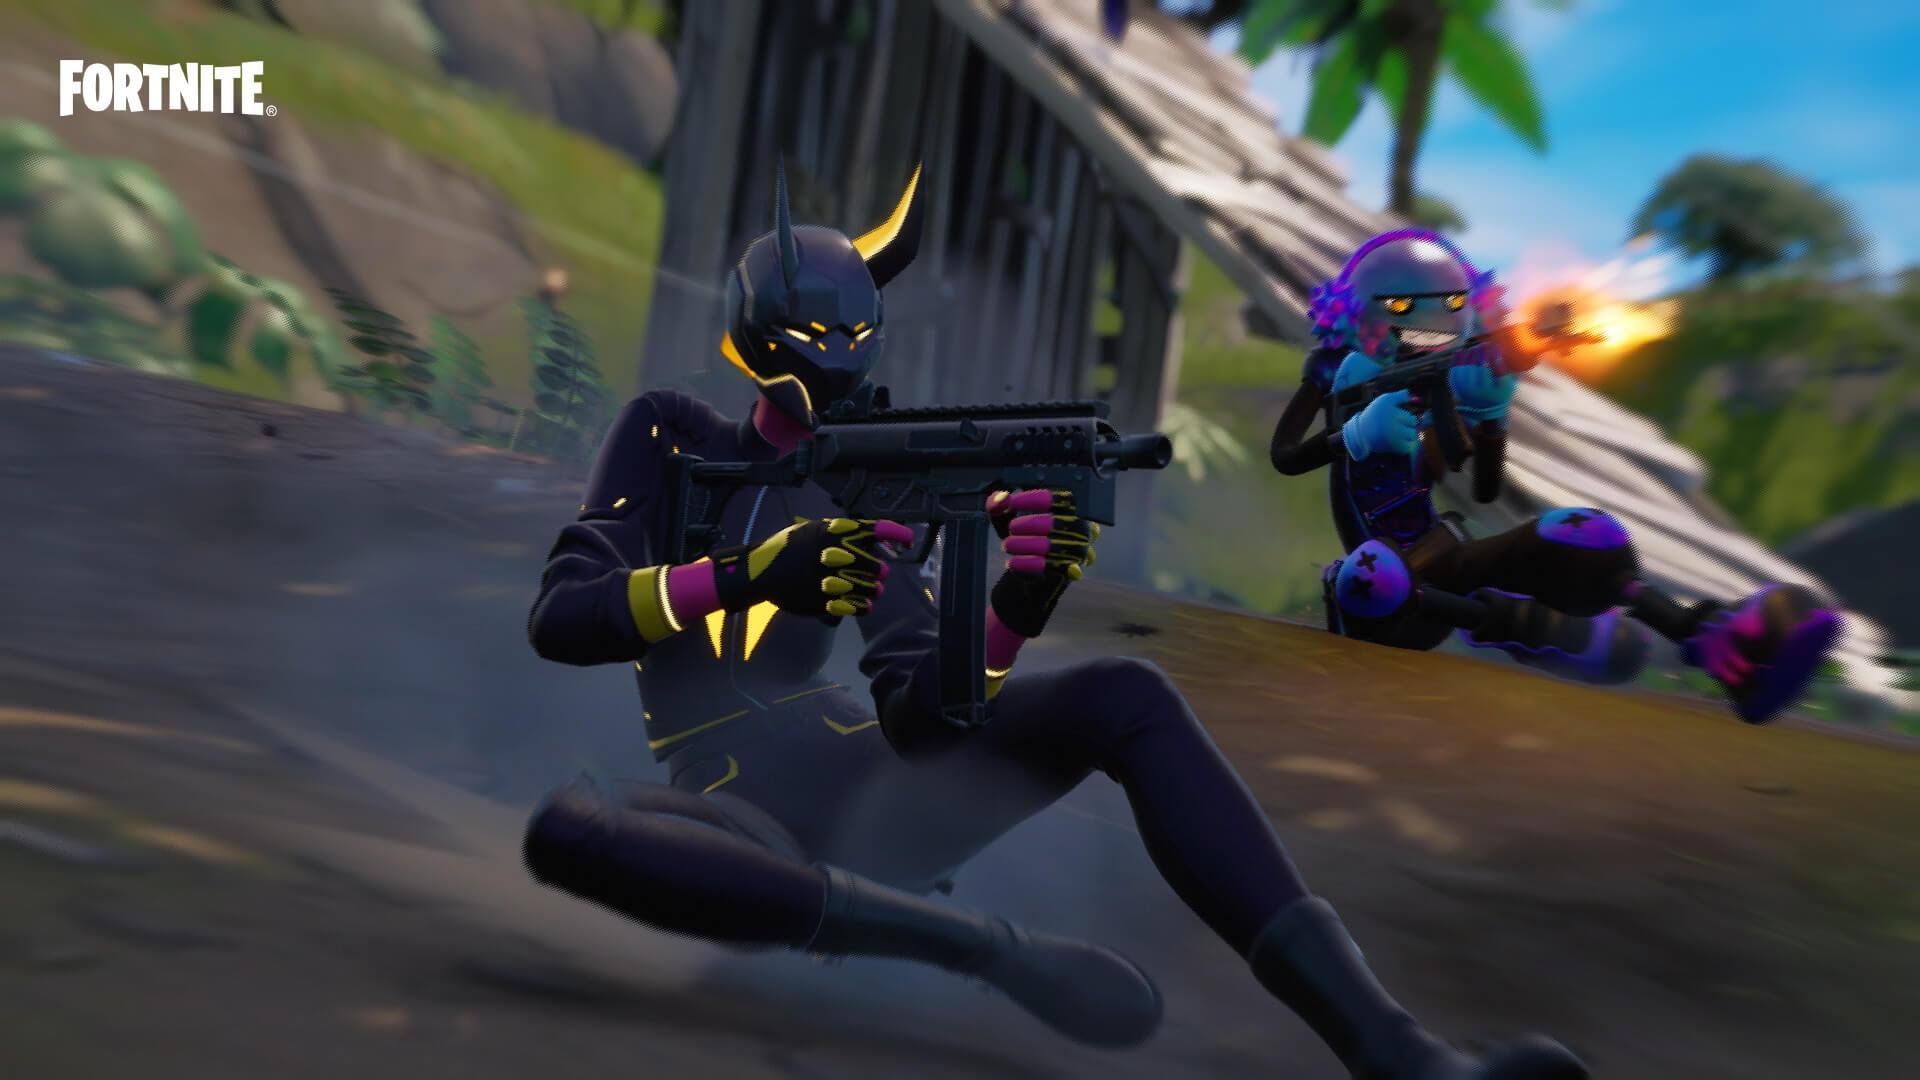 Nvidia confirms Fortnite coming on its Cloud gaming service for iOS, ET CIO